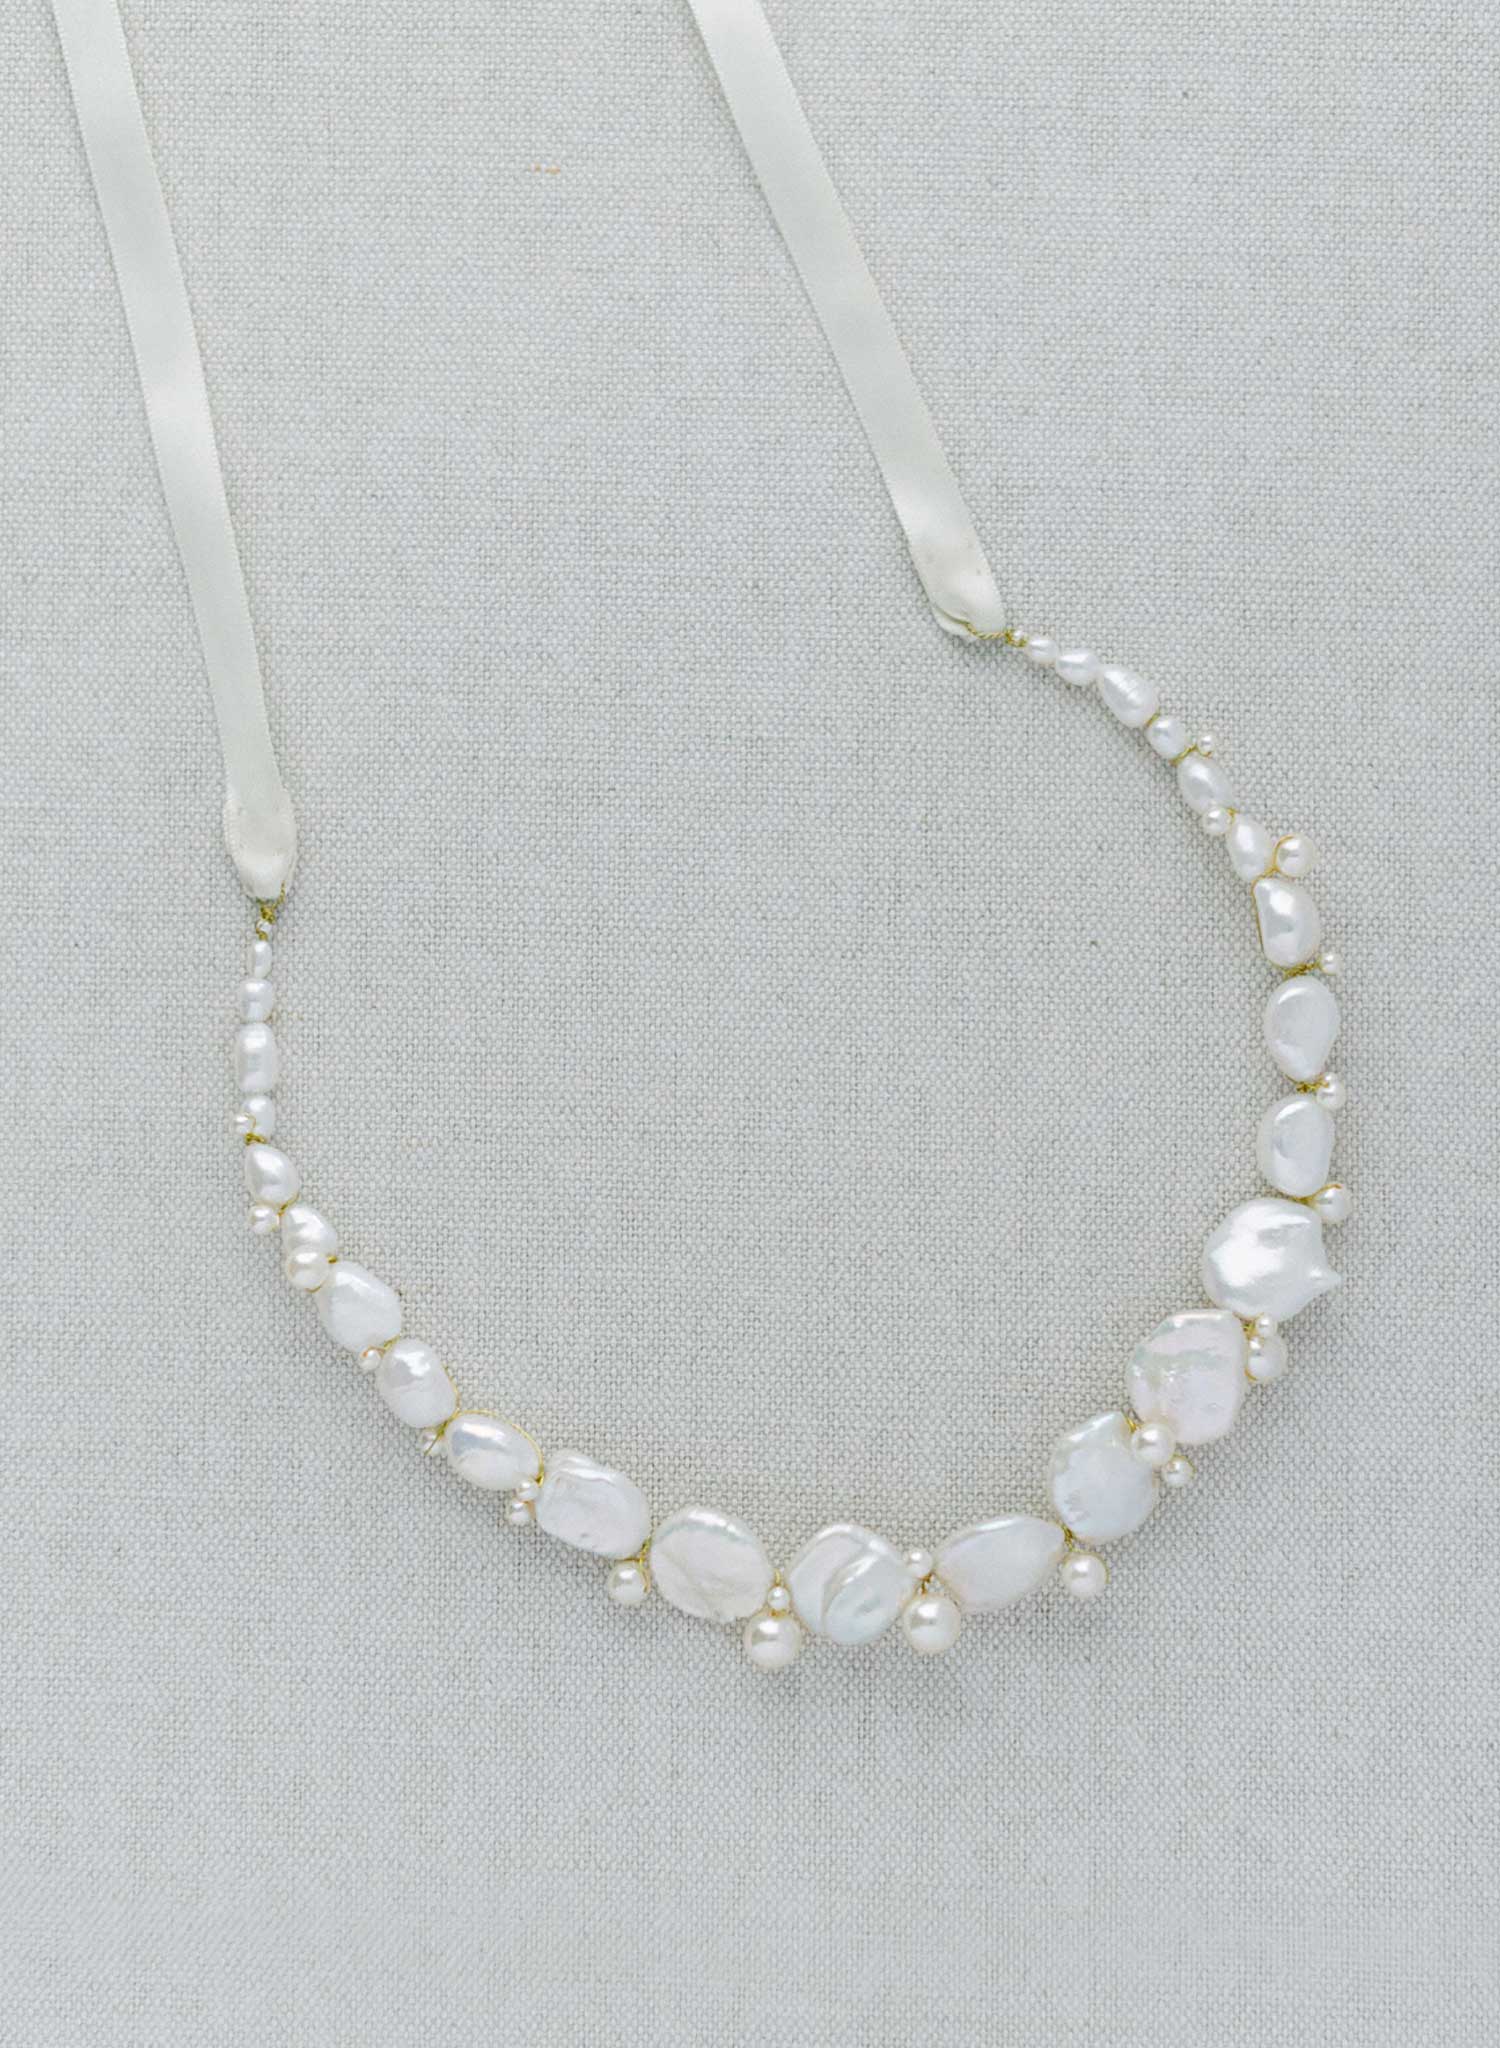 Nonpareil pearl necklace - Style #2404